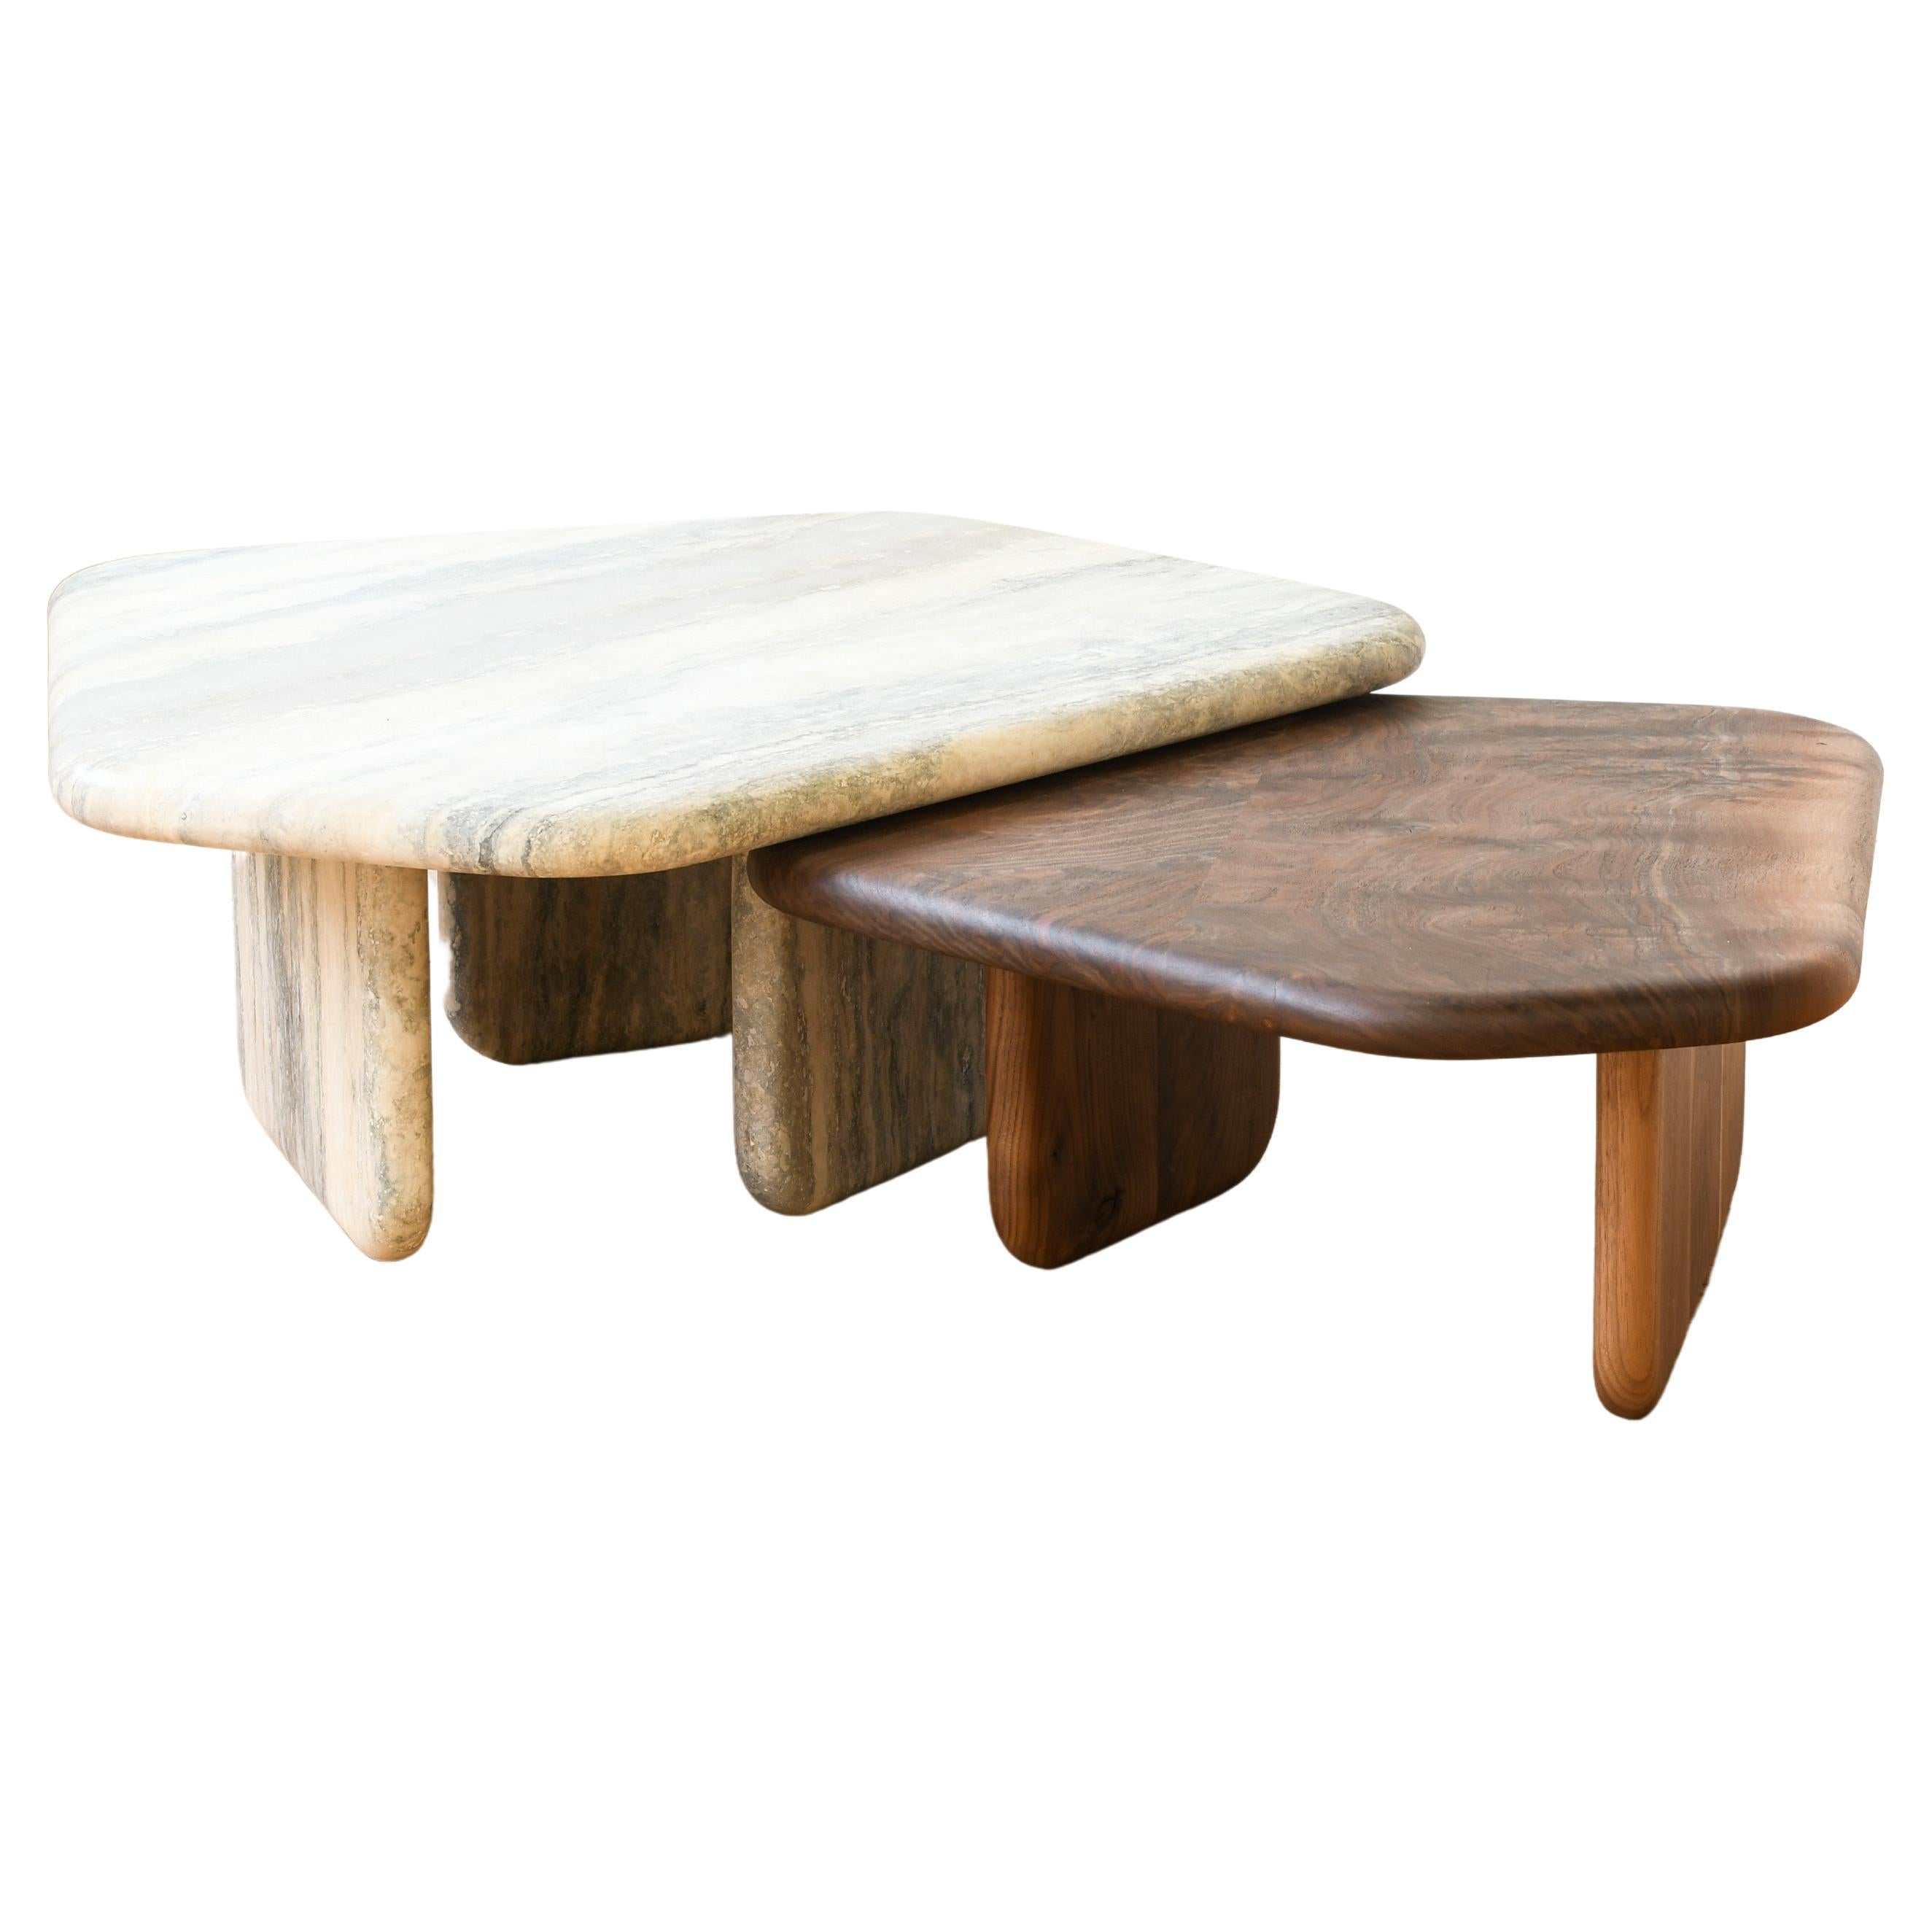 Dolmen Table pair in Silver Travertine and Claro Walnut by Jeff Martin Joinery For Sale